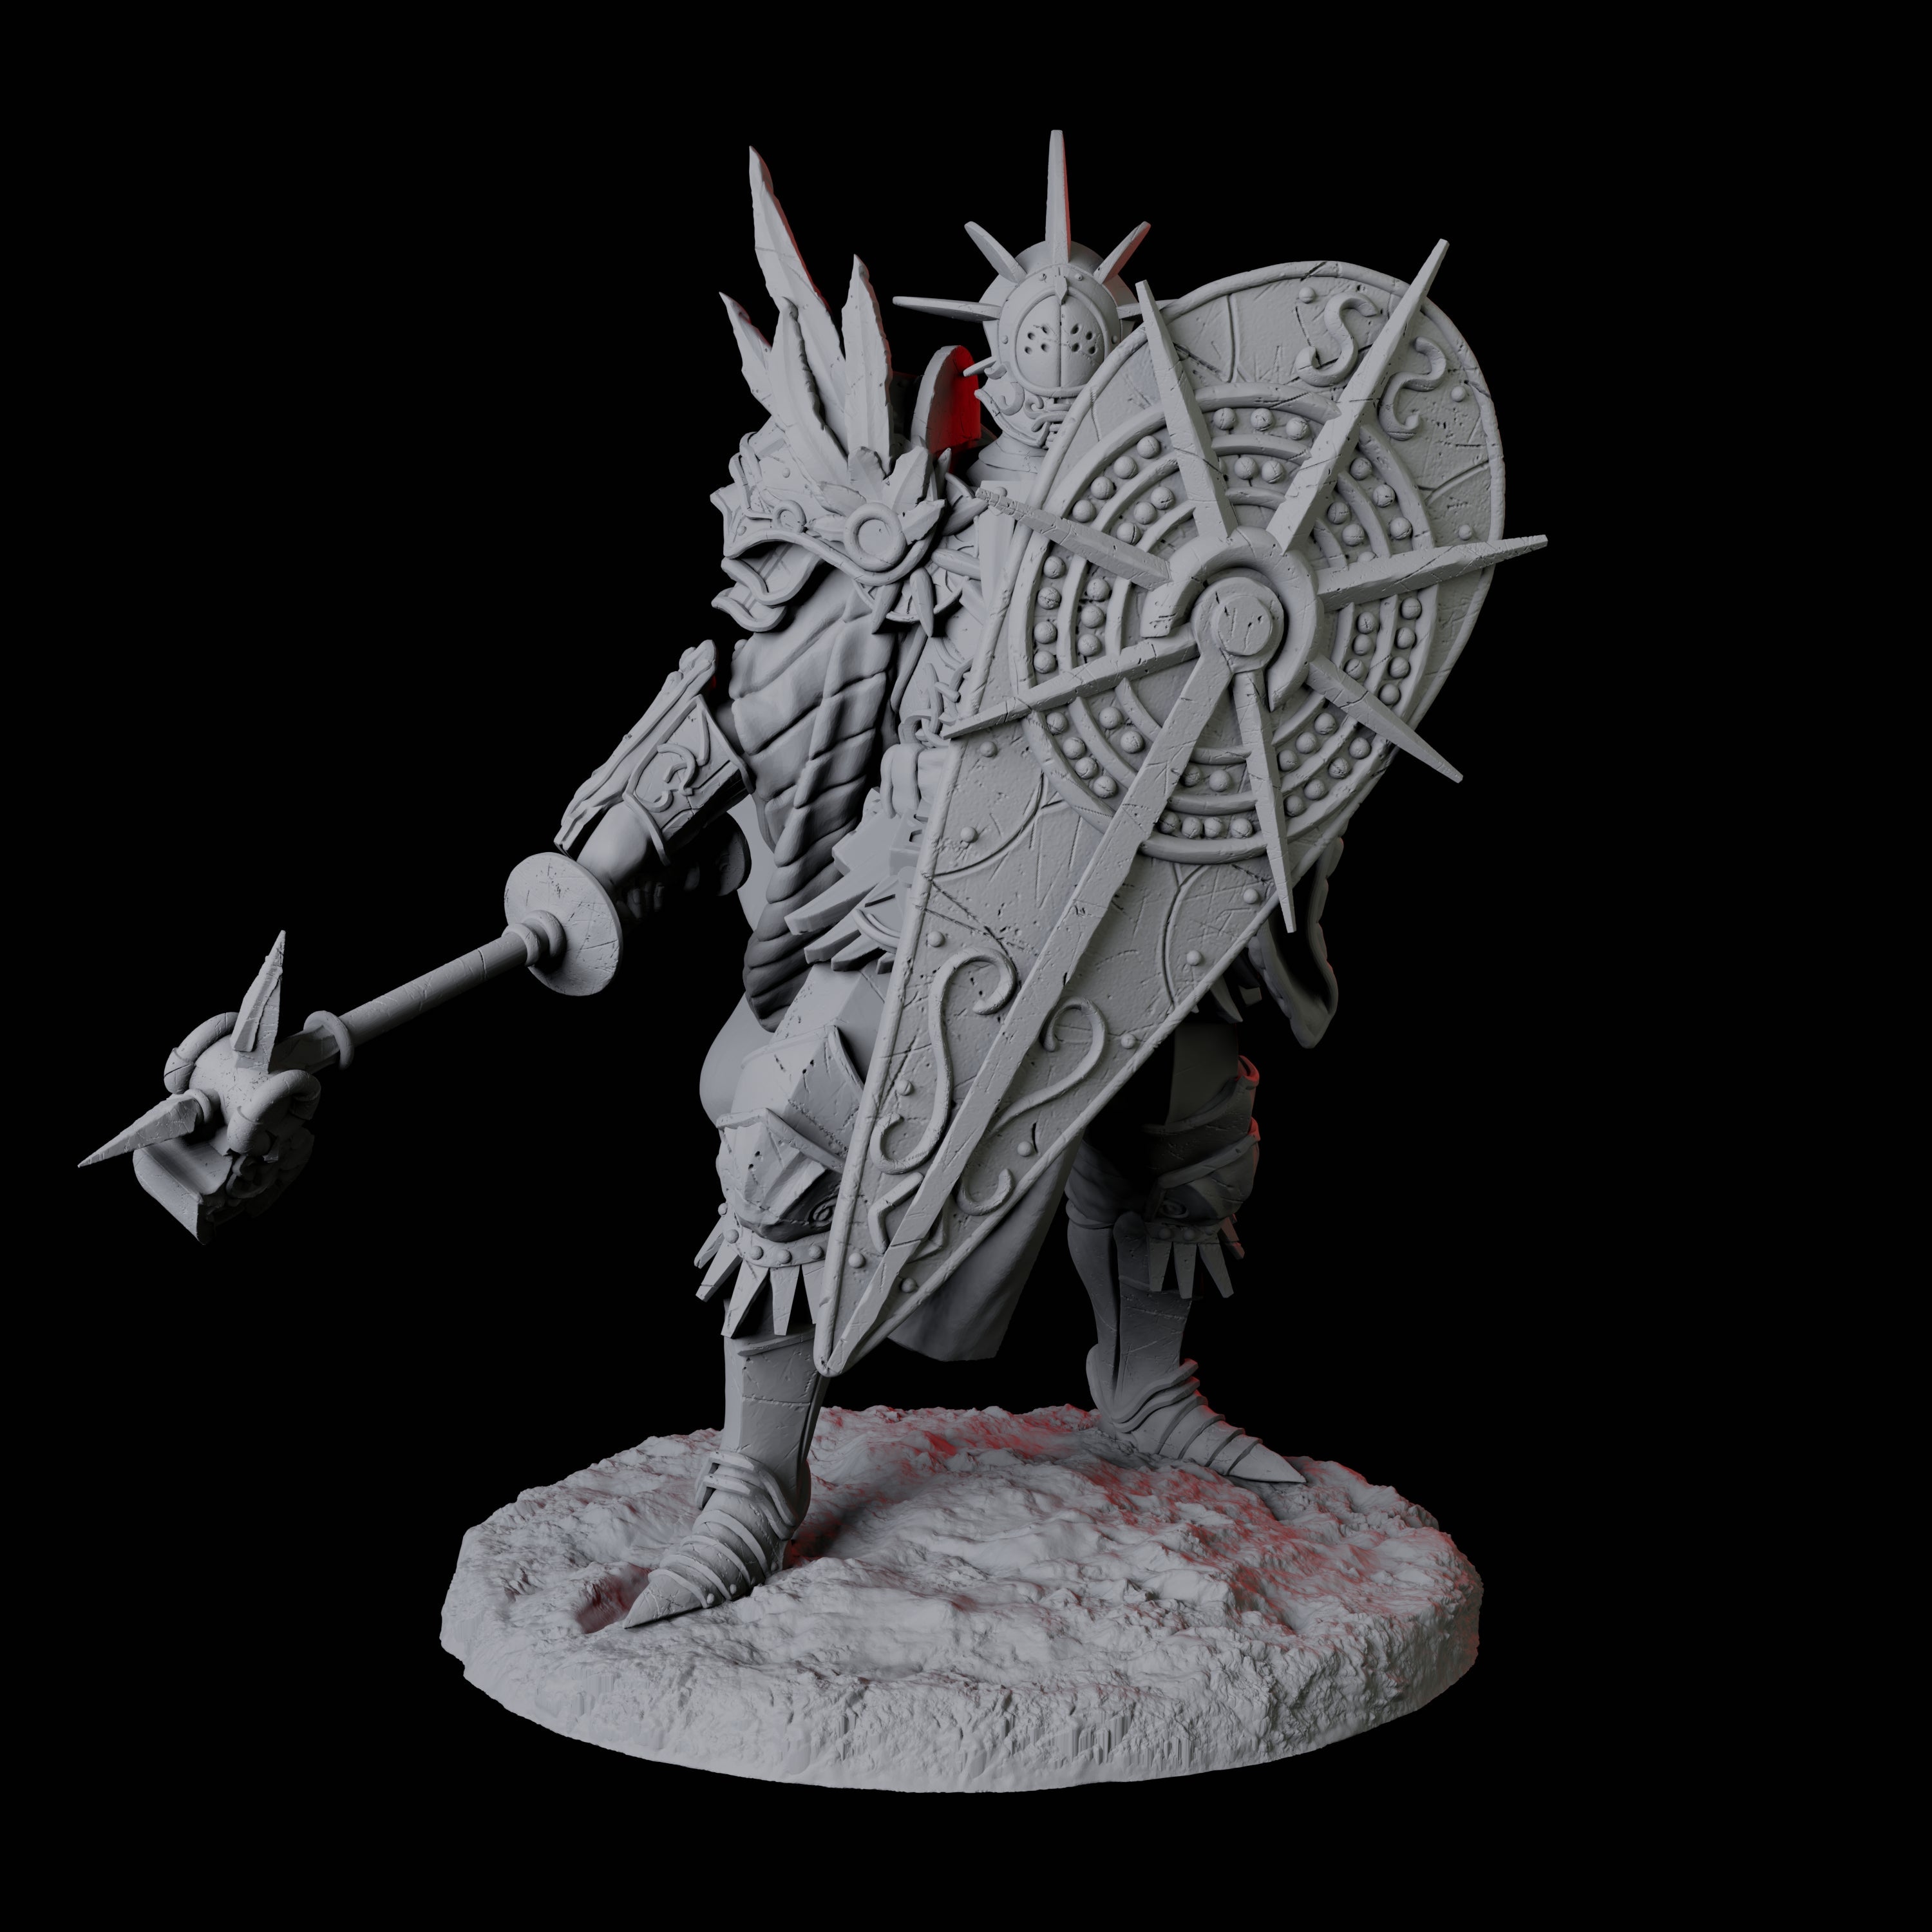 Powerful Legion Archon A Miniature for Dungeons and Dragons, Pathfinder or other TTRPGs